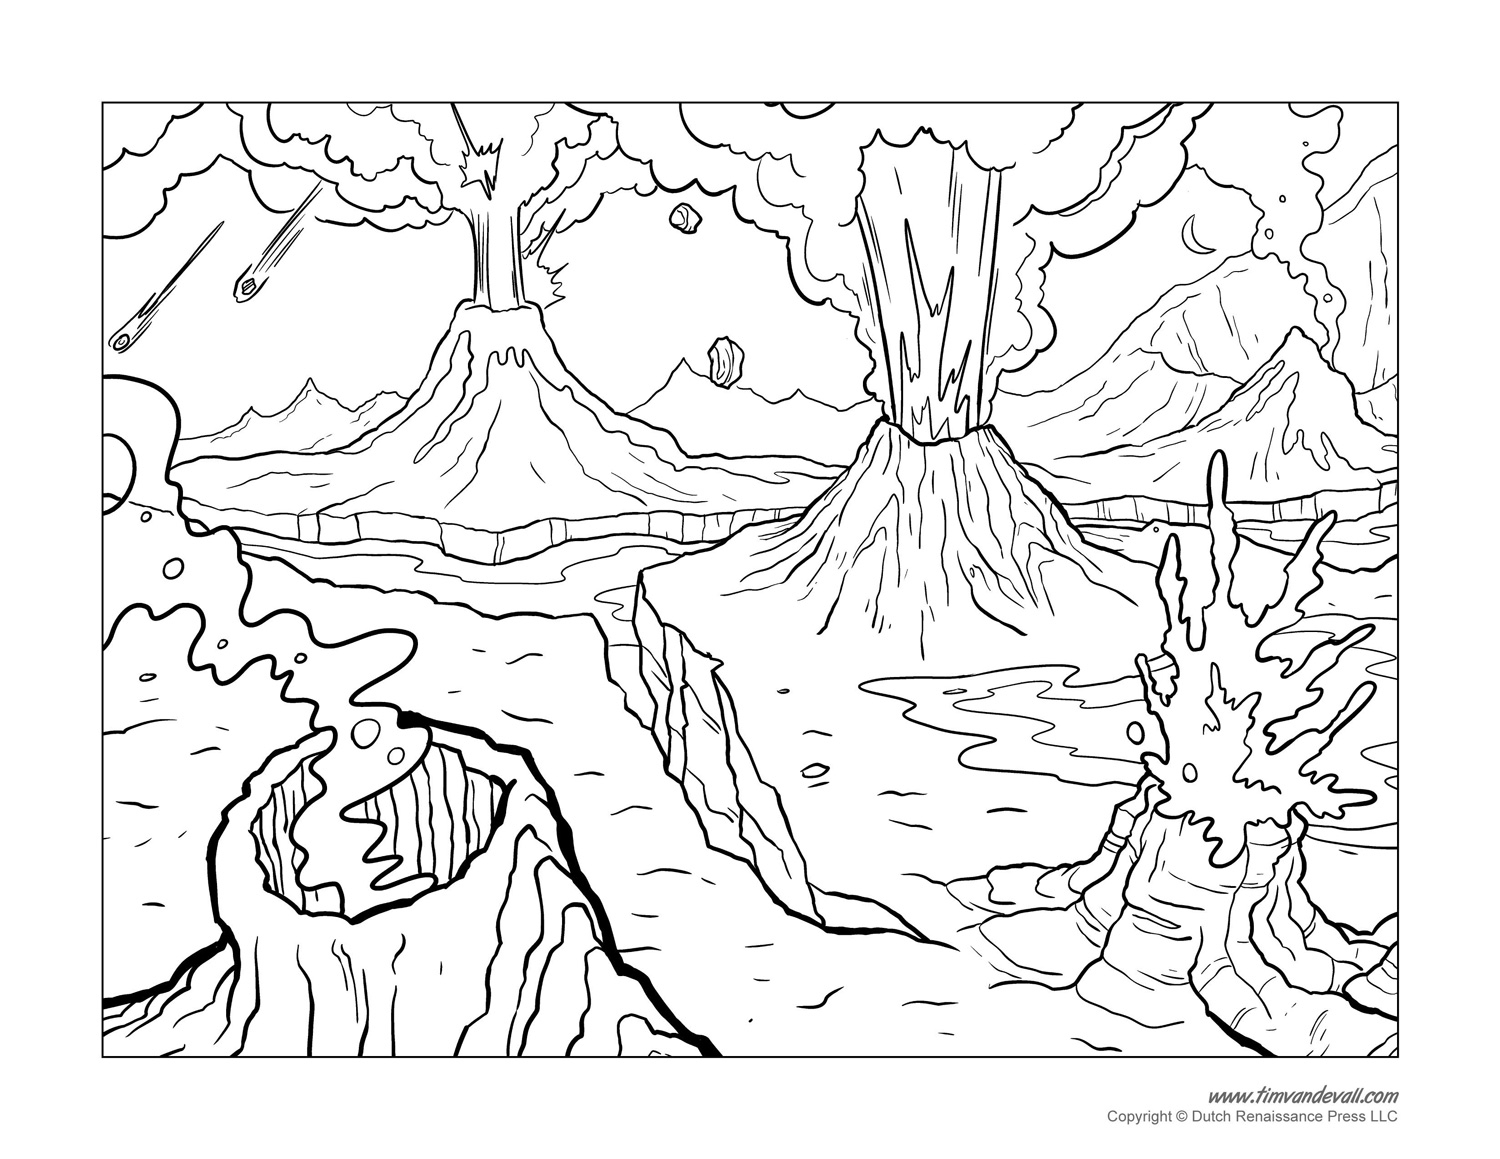 Coloring Pages For Elementary Students Volcano Coloring Pages